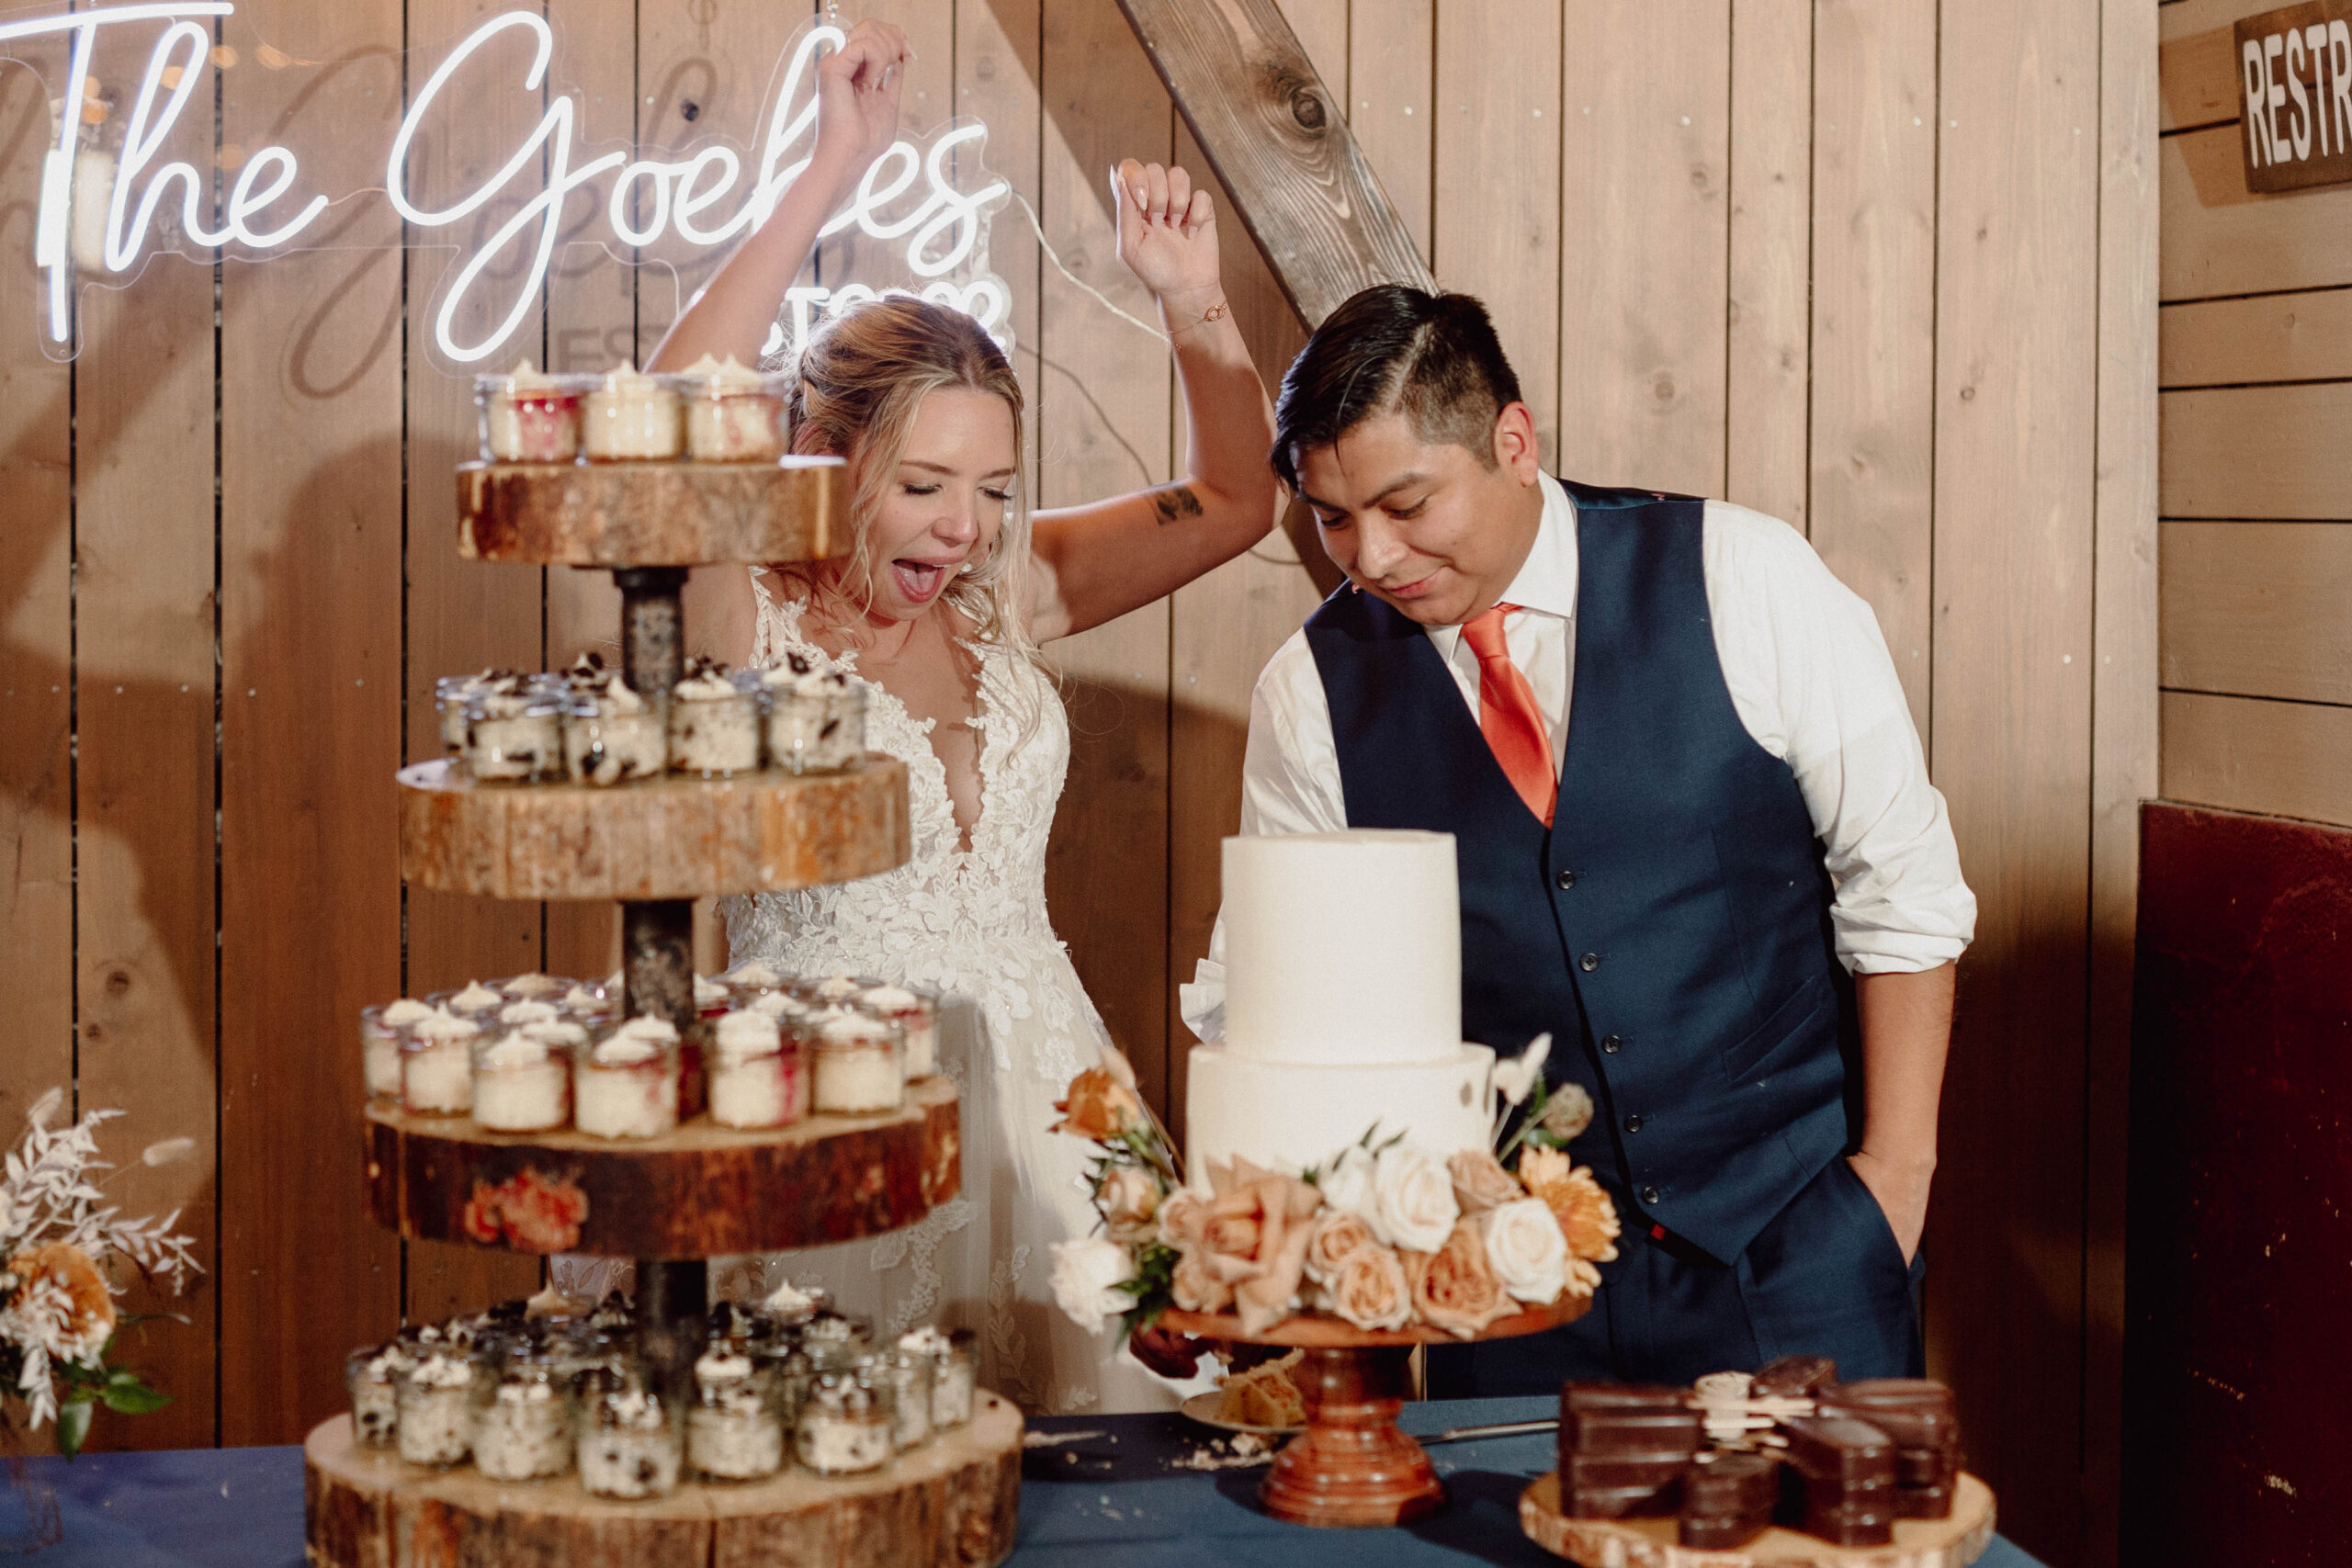 Bride and Groom at their dessert table. They are cutting the cake. Bride has her hands in the air, and their neon sign is behind them